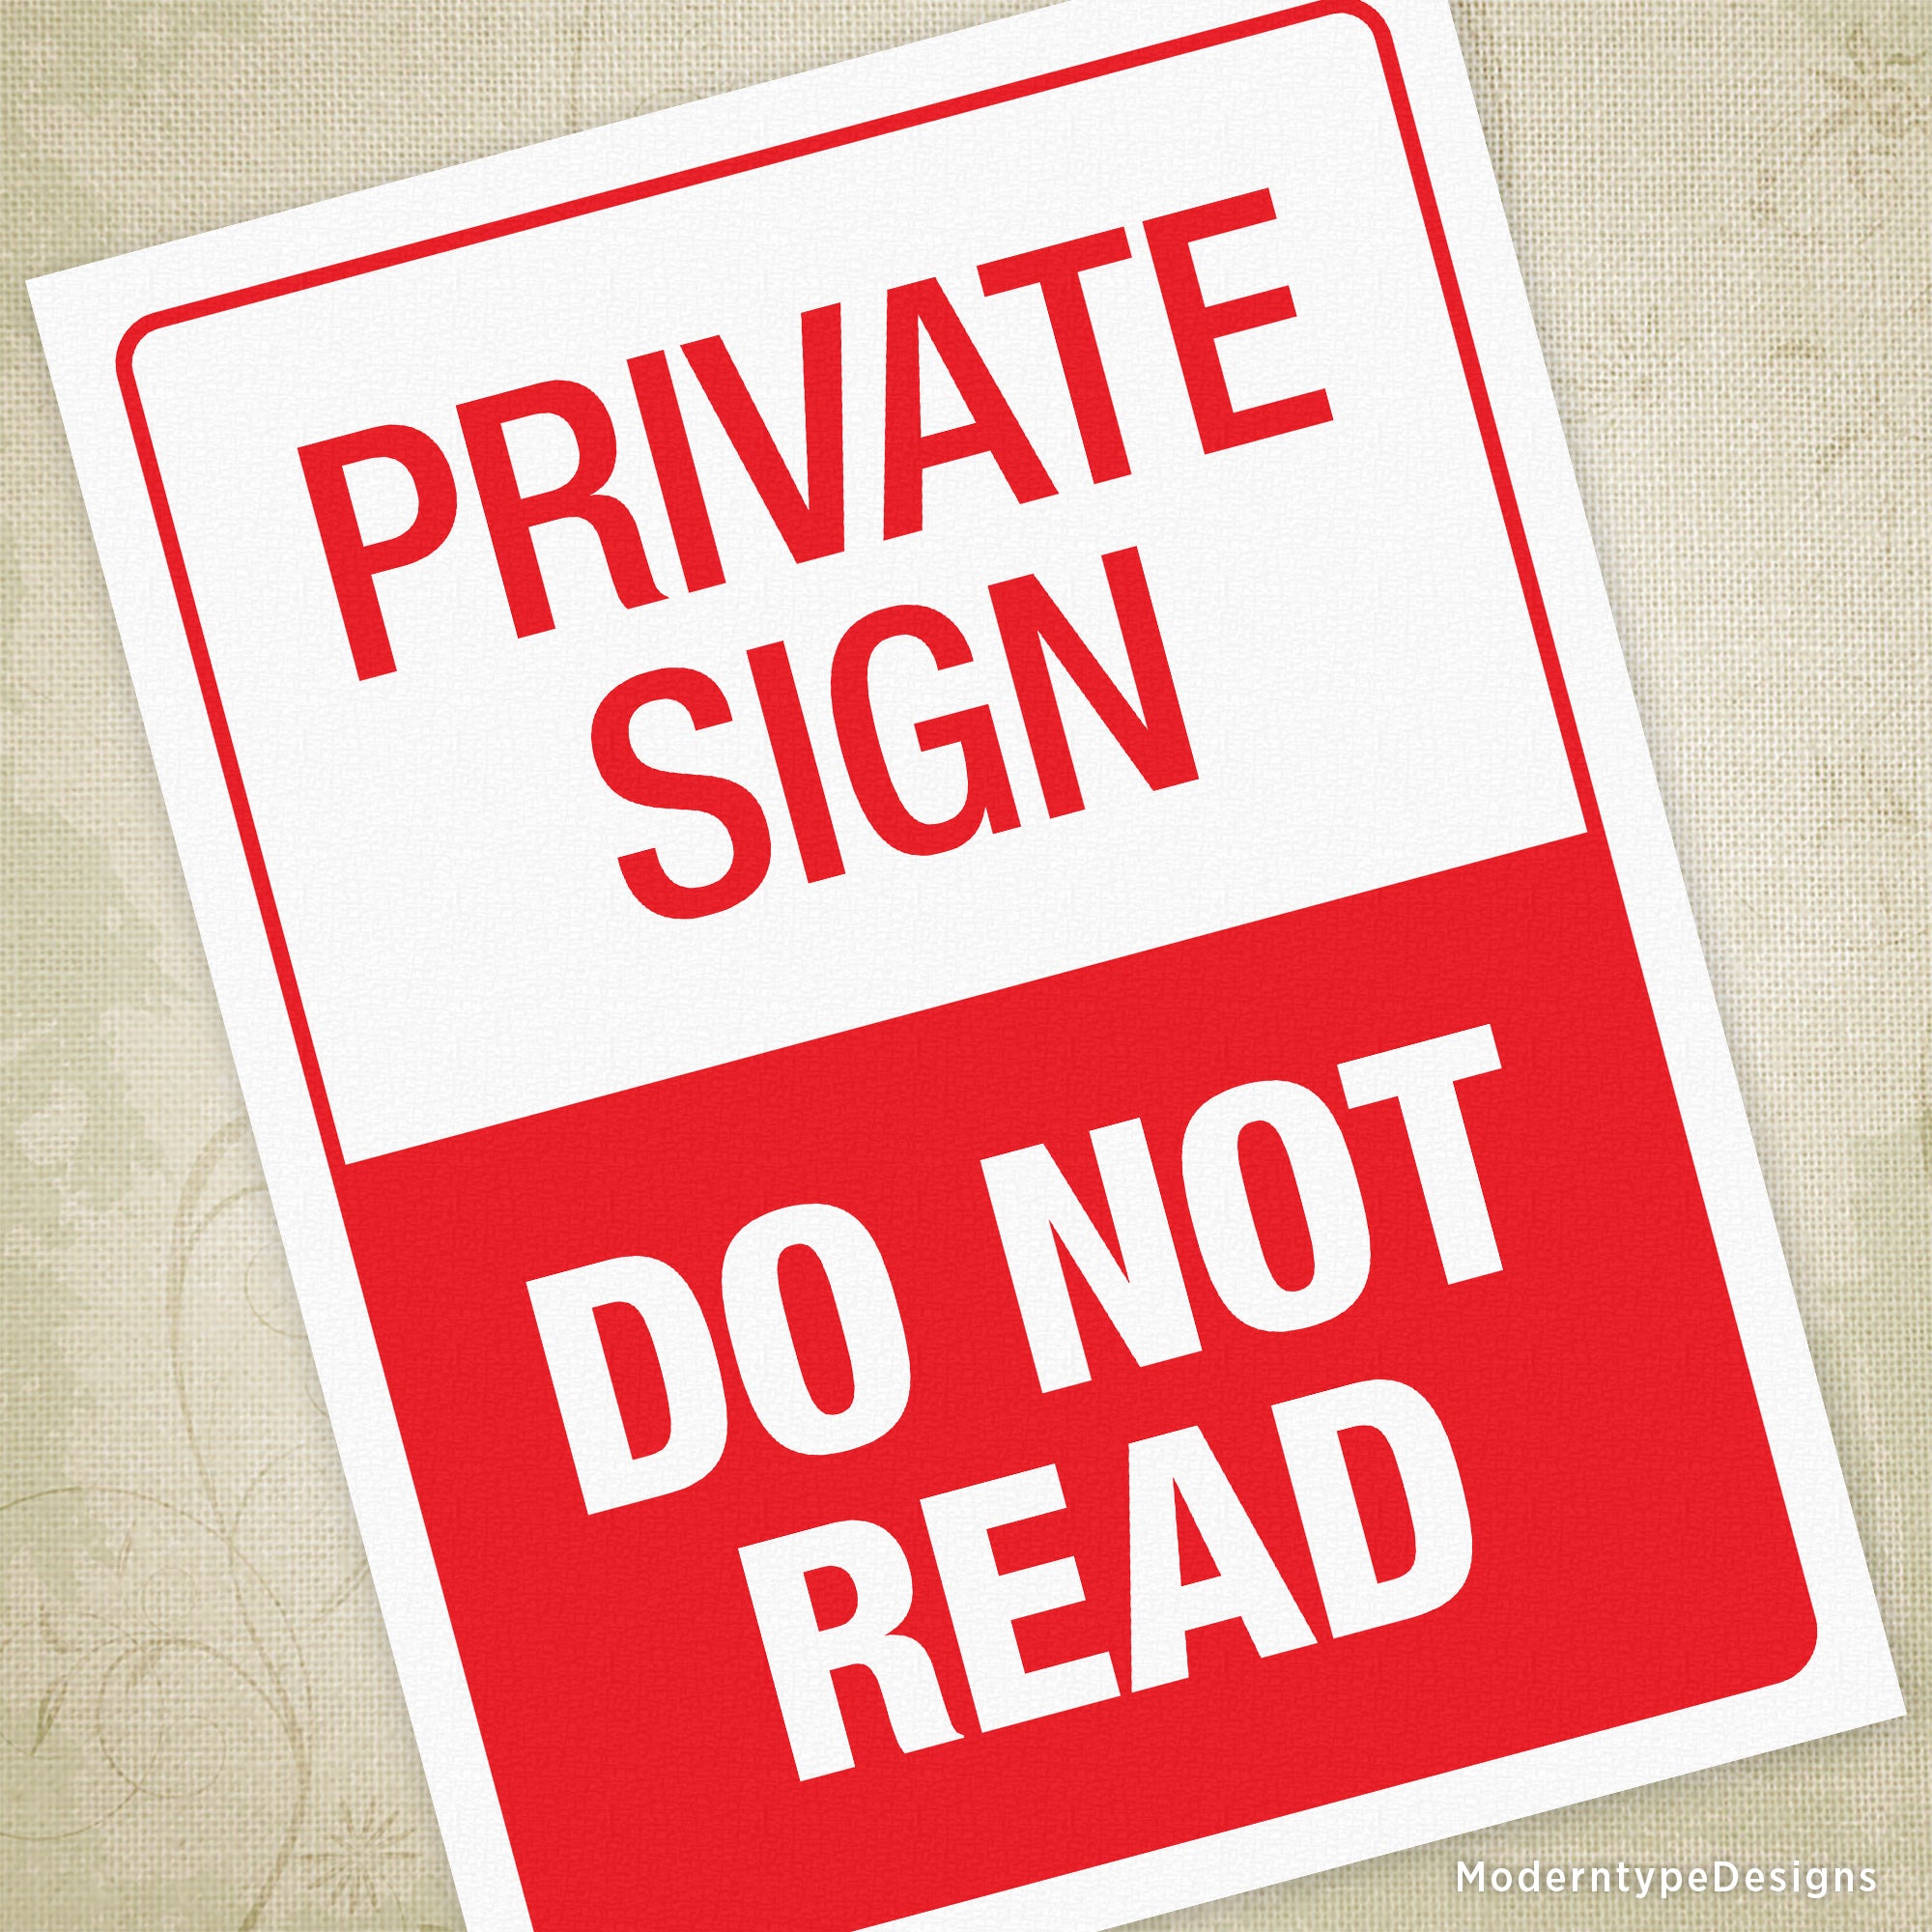 Private Sign Do Not Read Printable Sign